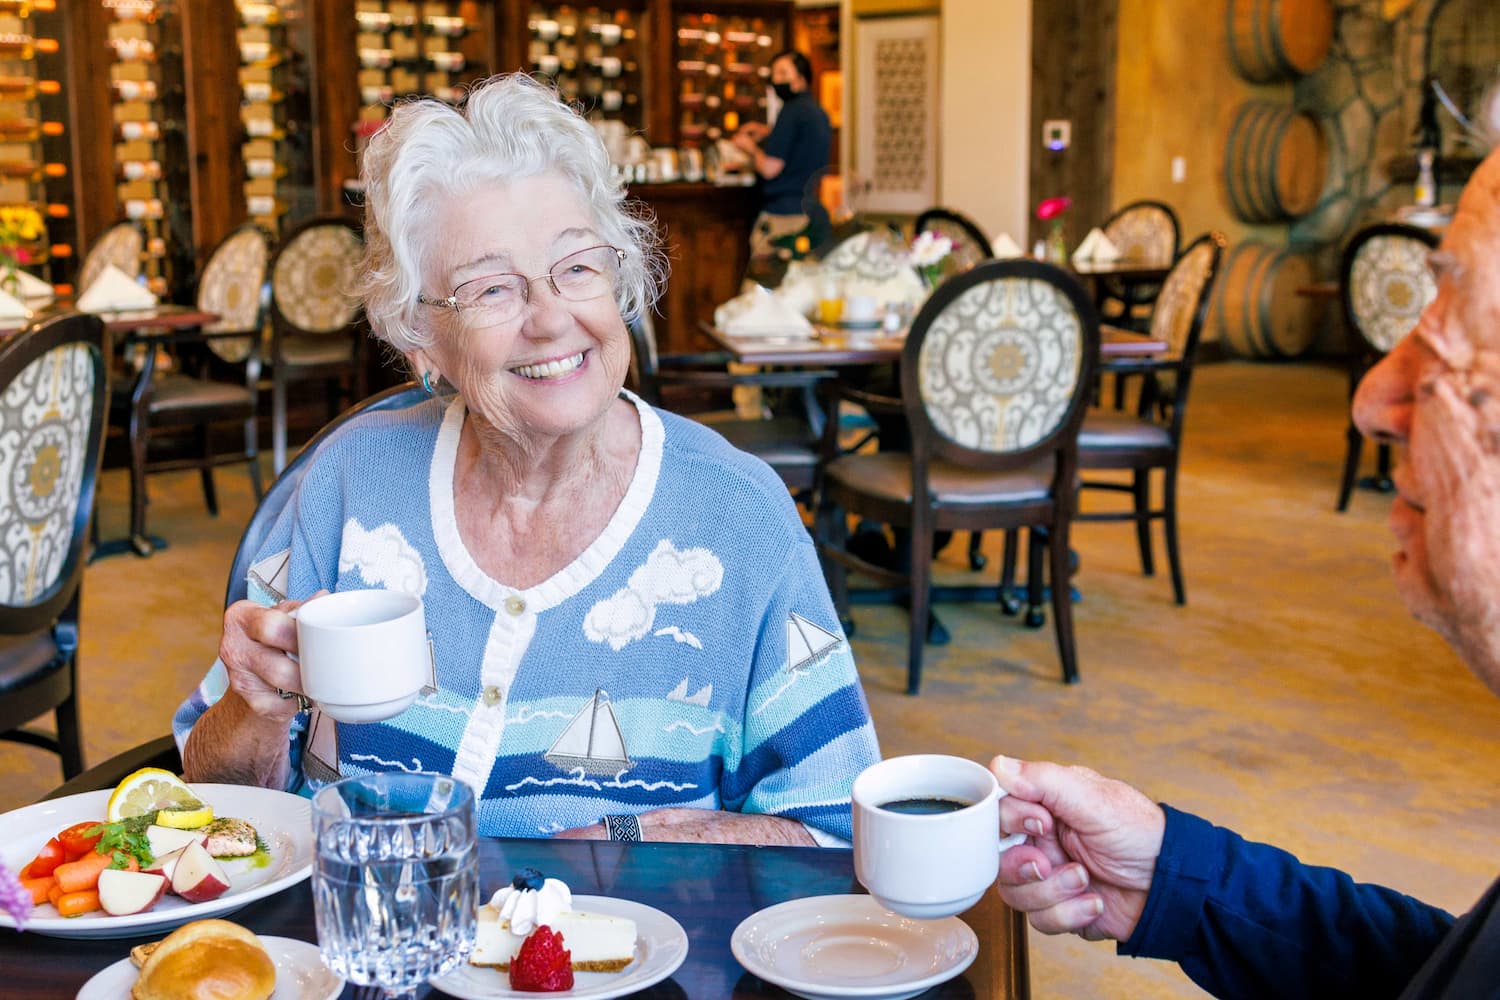 Two residents smiling, holding coffee at breakfast